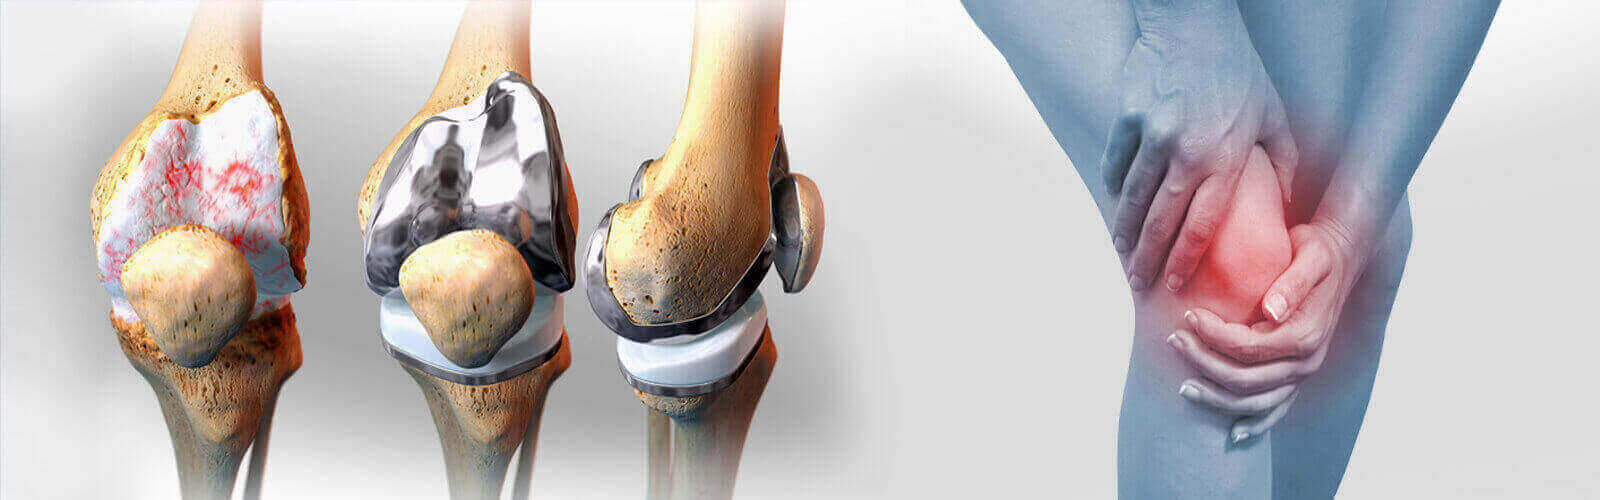 Knee Replacement Surgery in Uae